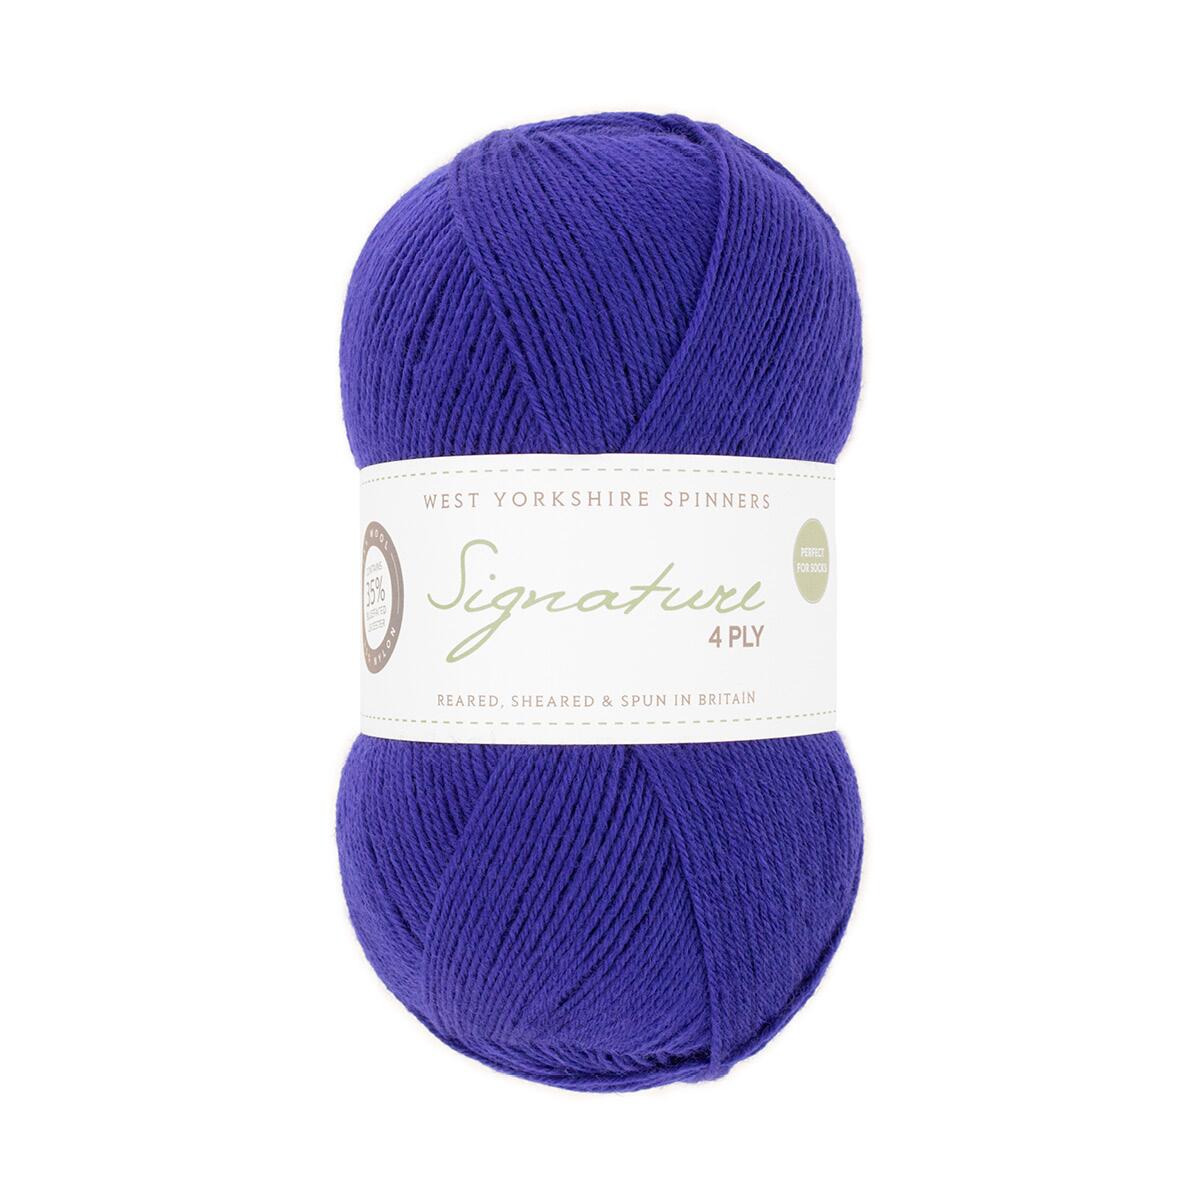 West Yorkshire Spinners Signature 4ply Unis 100g Farbe: 1005 Cobalt